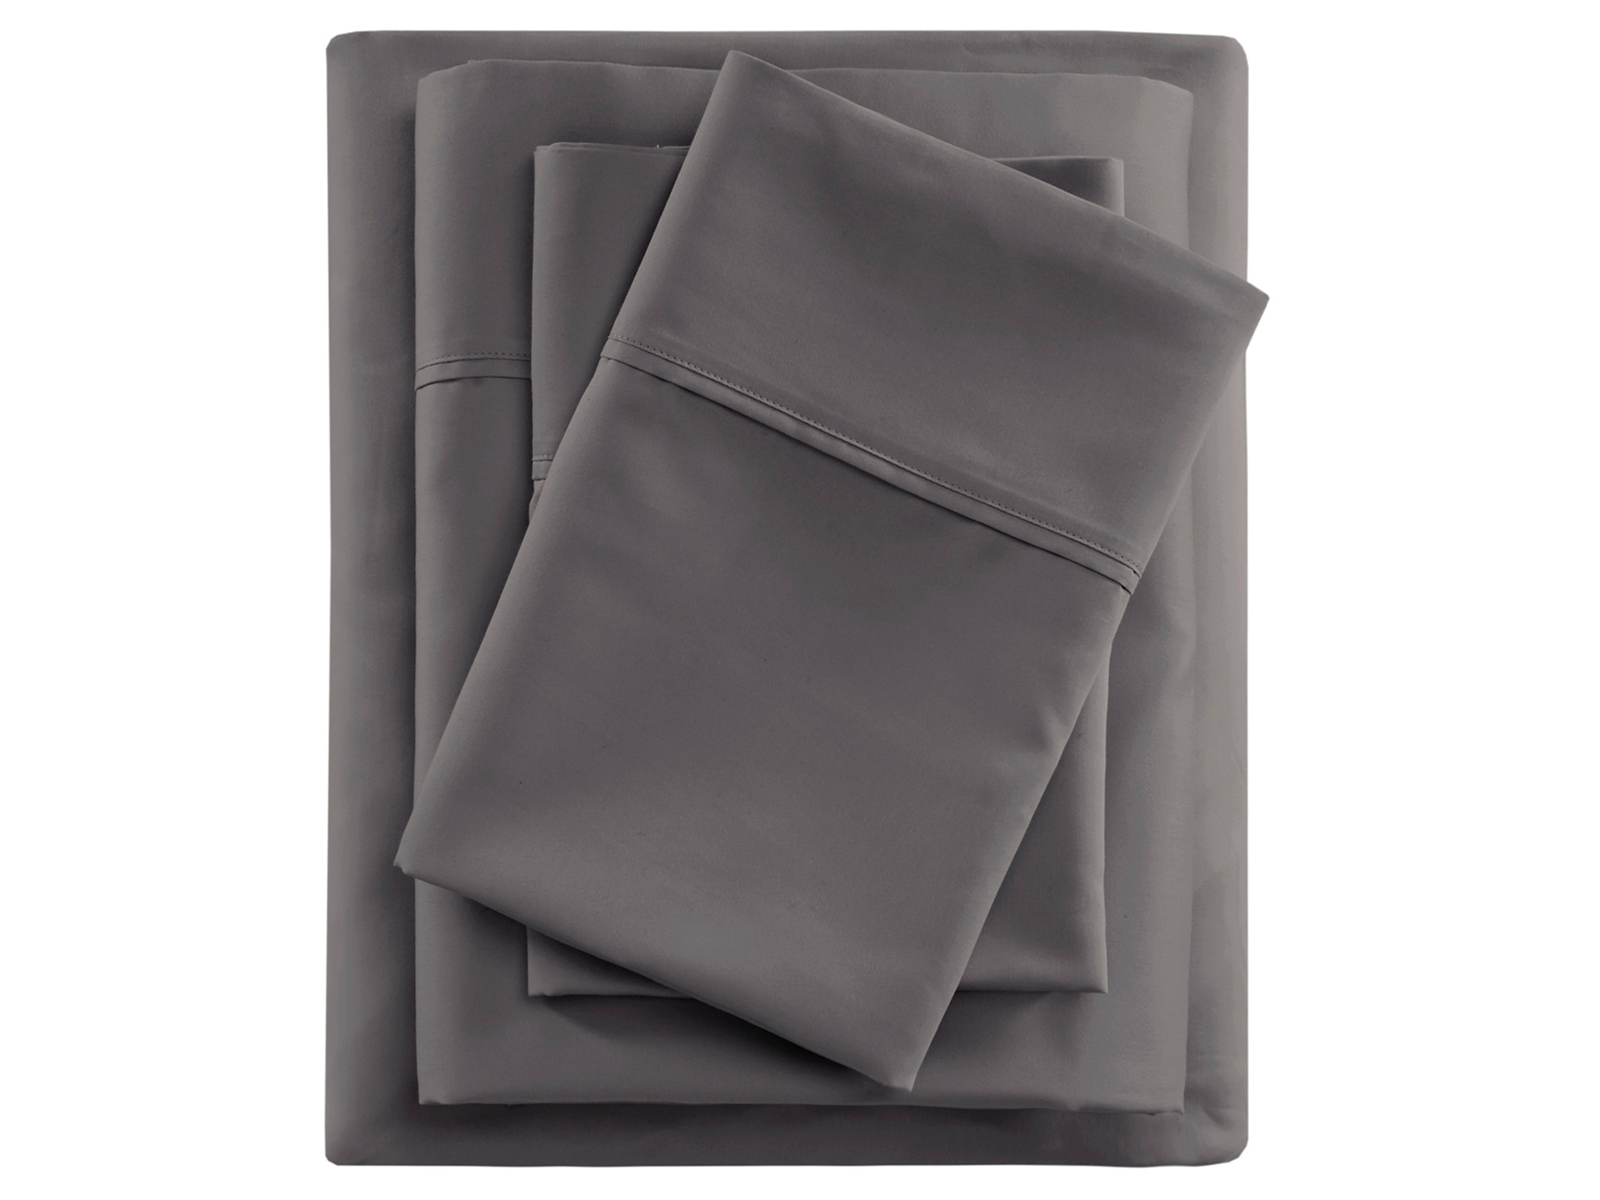 BeautyRest King 600 Thread Count Cooling Cotton Sheet Set | Charcoal